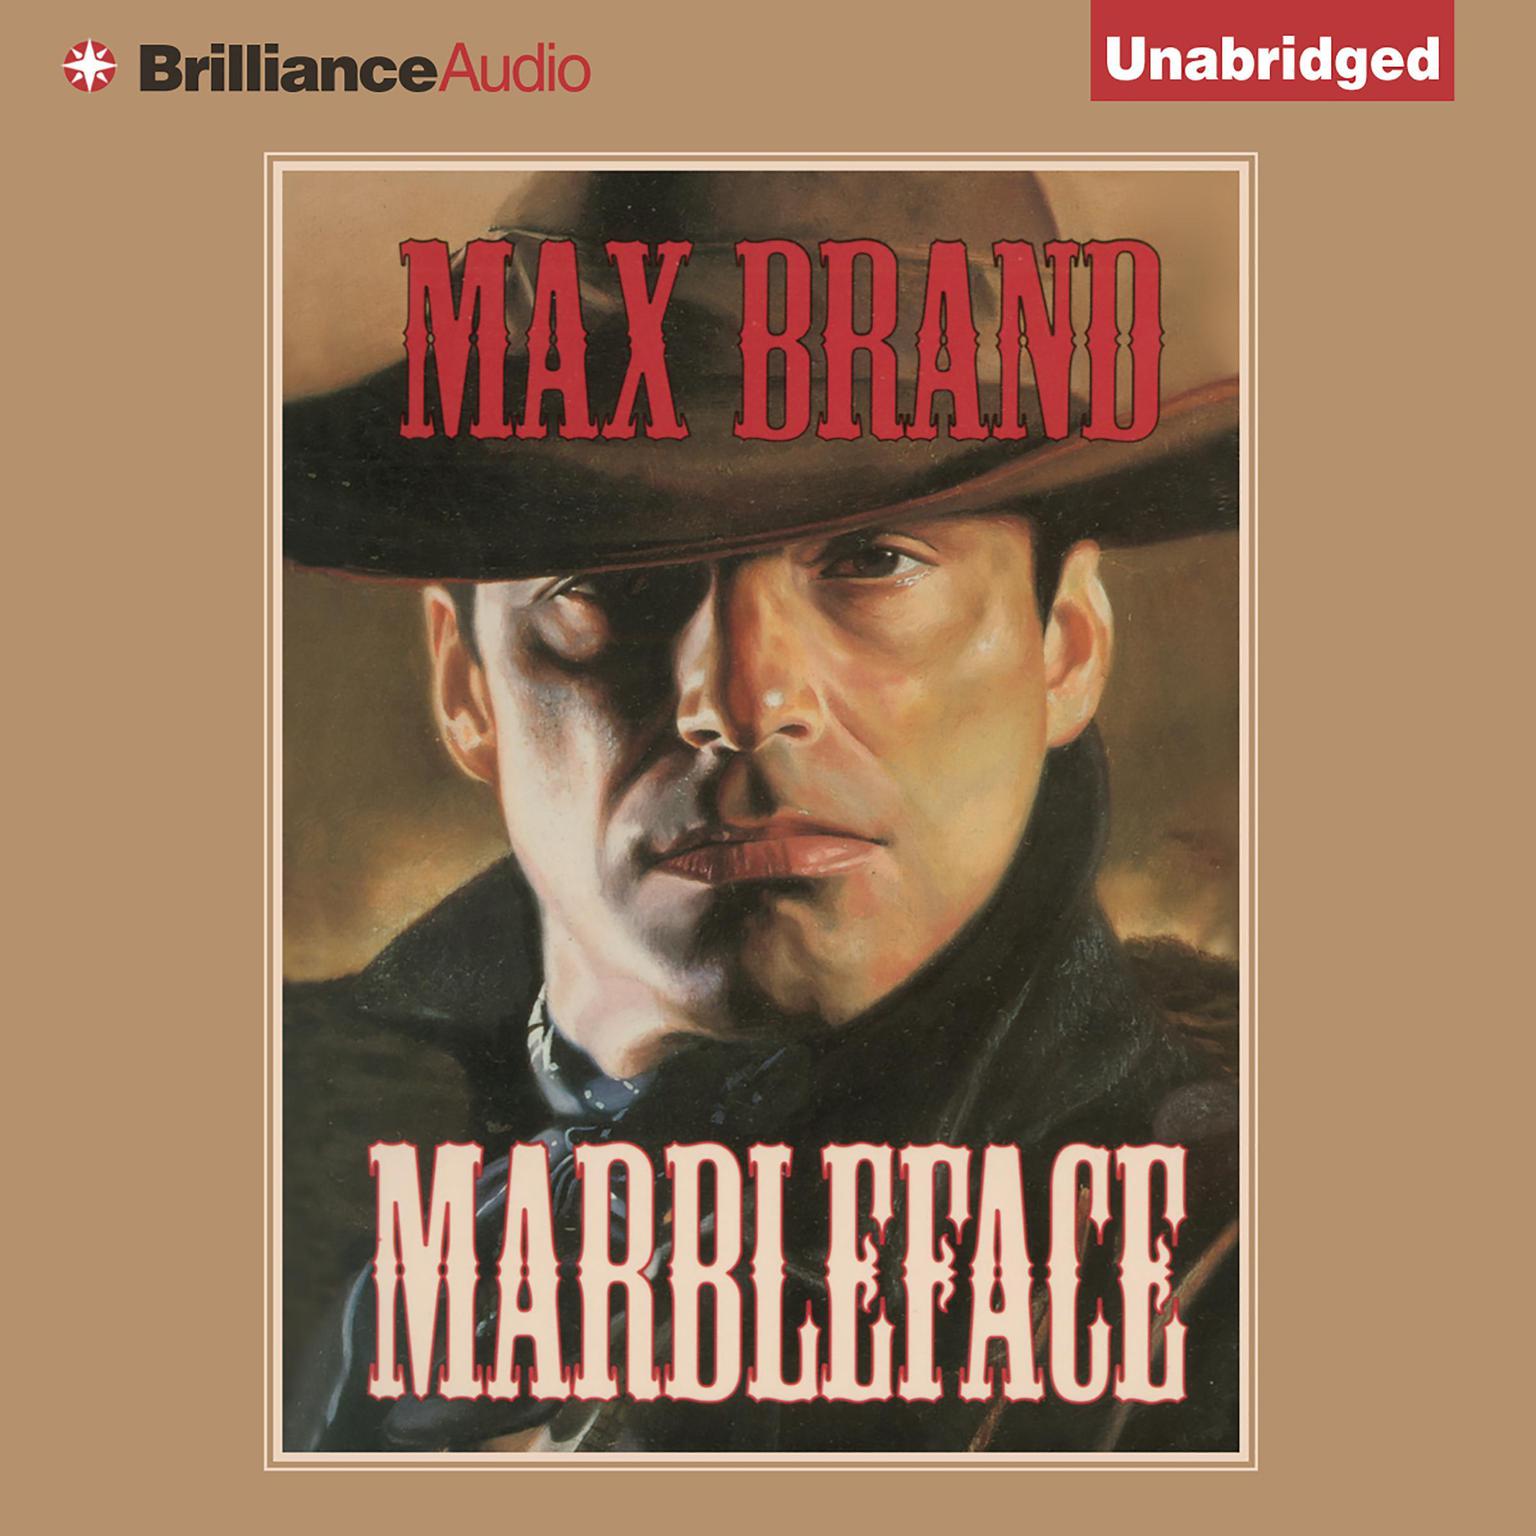 Marbleface Audiobook, by Max Brand